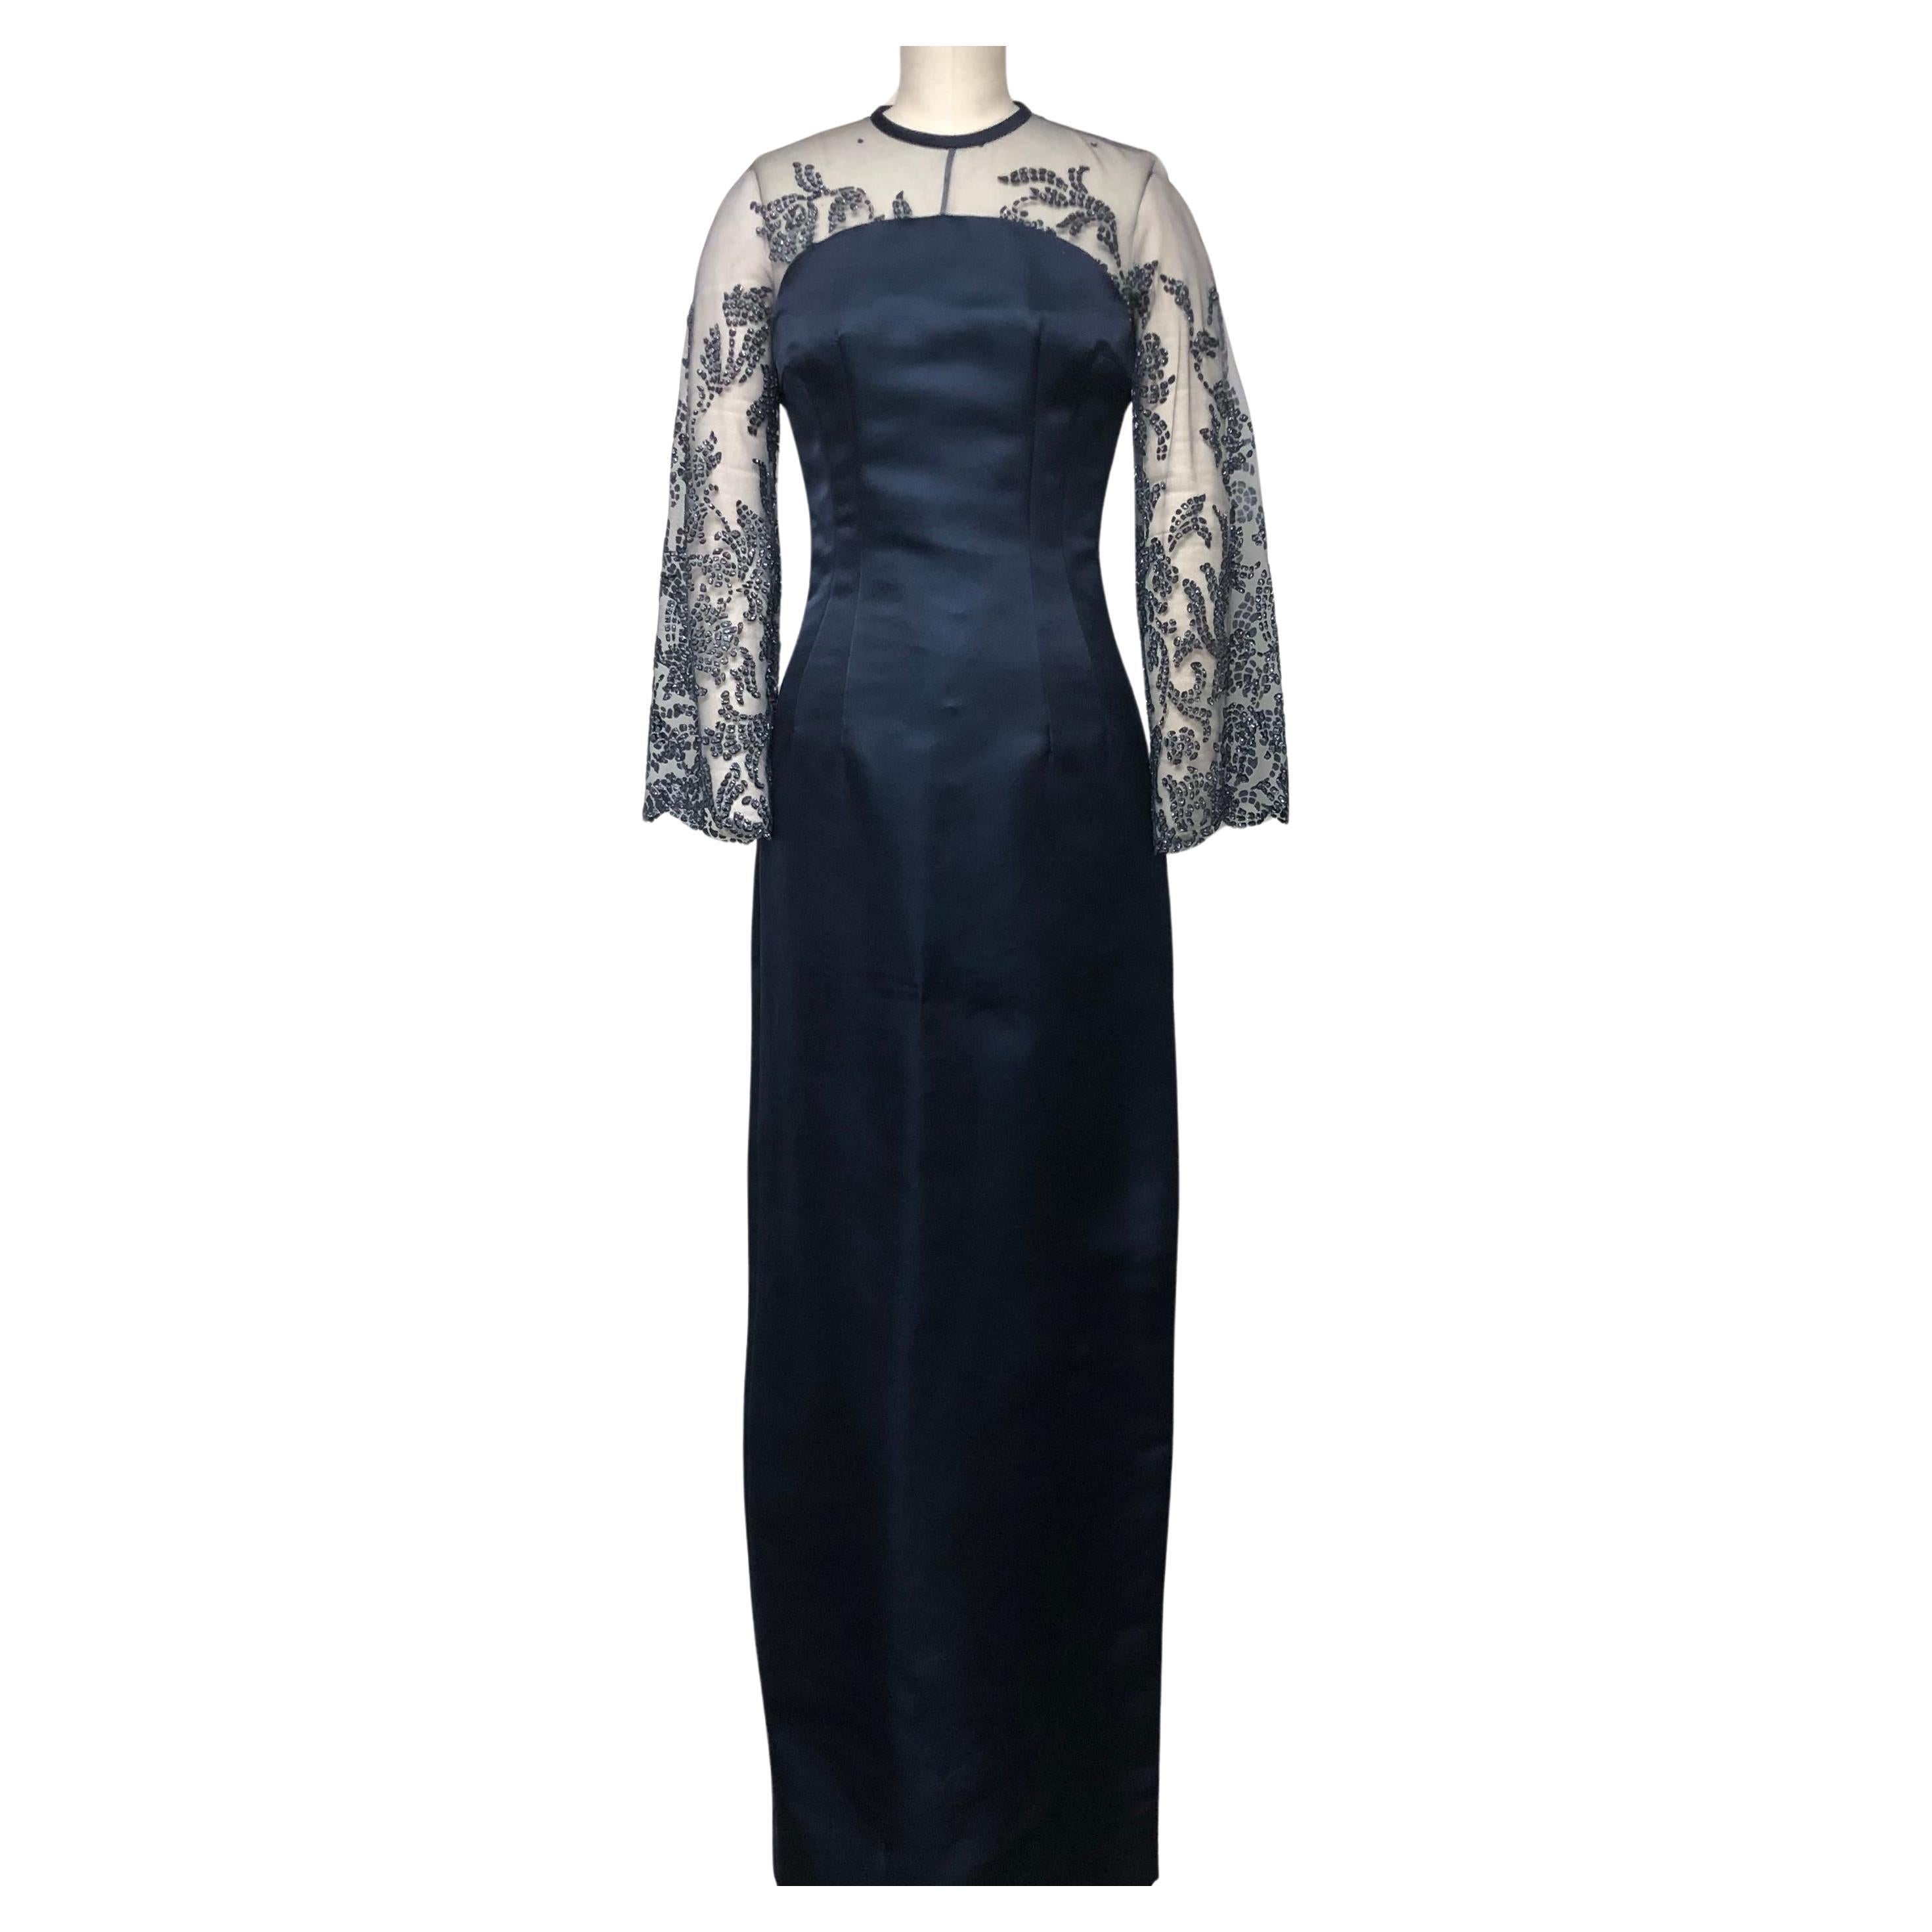 Navy Double Faced Satin Gown with Embellished Upper Bodice and Sleeves For Sale